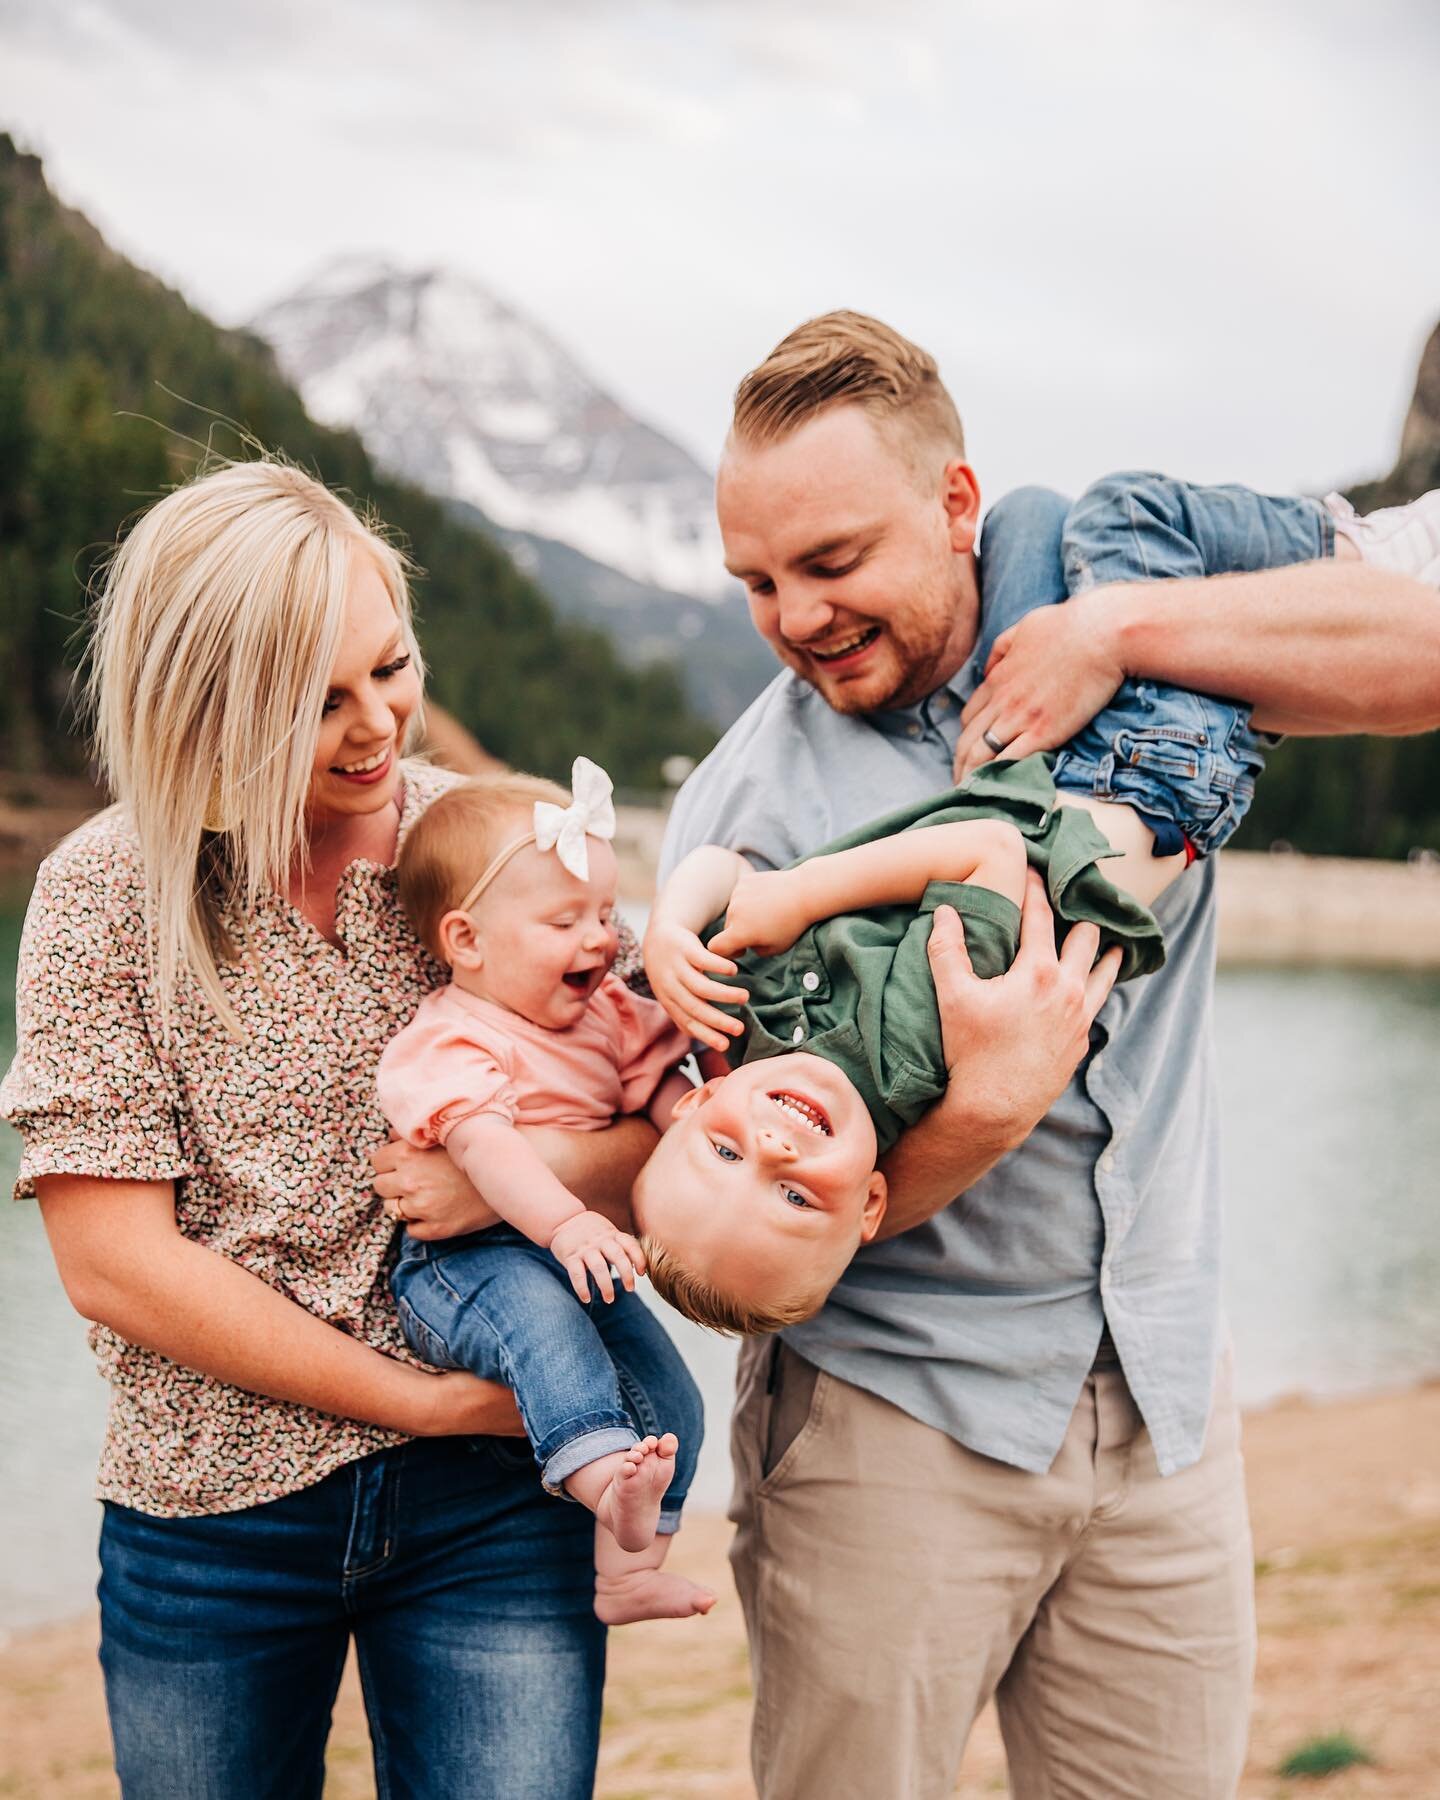 Family photo season is heating right up! The summer is my personal favorite for shooting in the mountains and my calendar is filling up fast, so let&rsquo;s get your family scheduled! 😍
.
.
.
.
.
.
.
.
#calistoddardphotos #calistoddardfamilies #utah